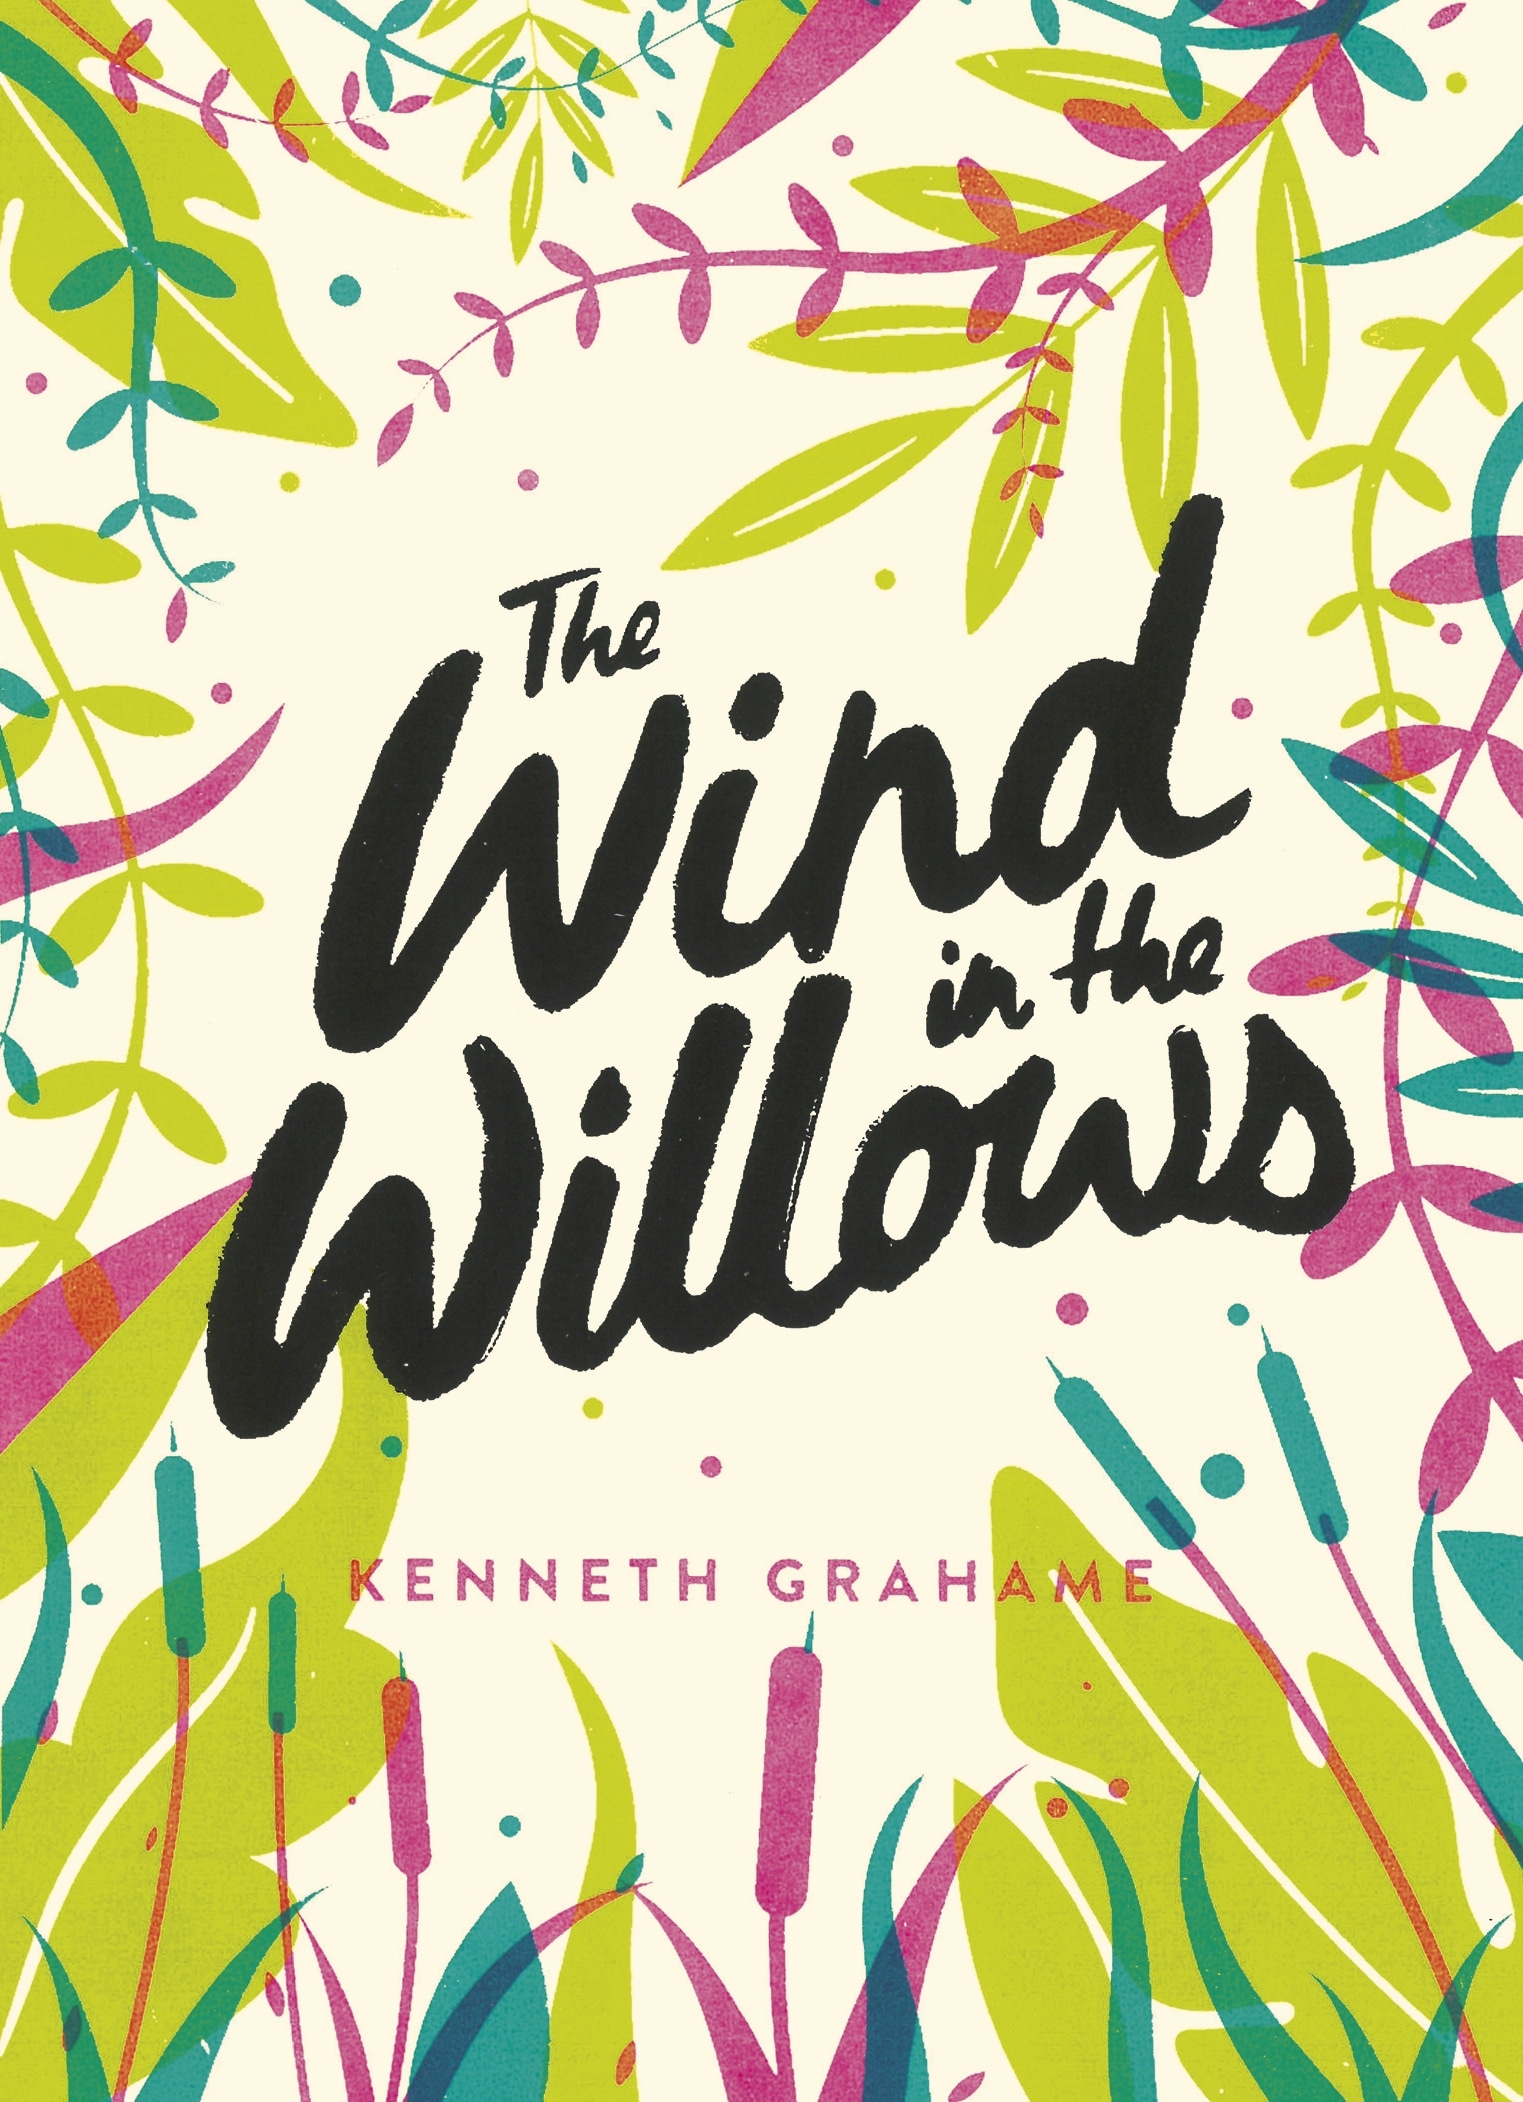 Book “The Wind in the Willows” by Kenneth Grahame — April 16, 2020